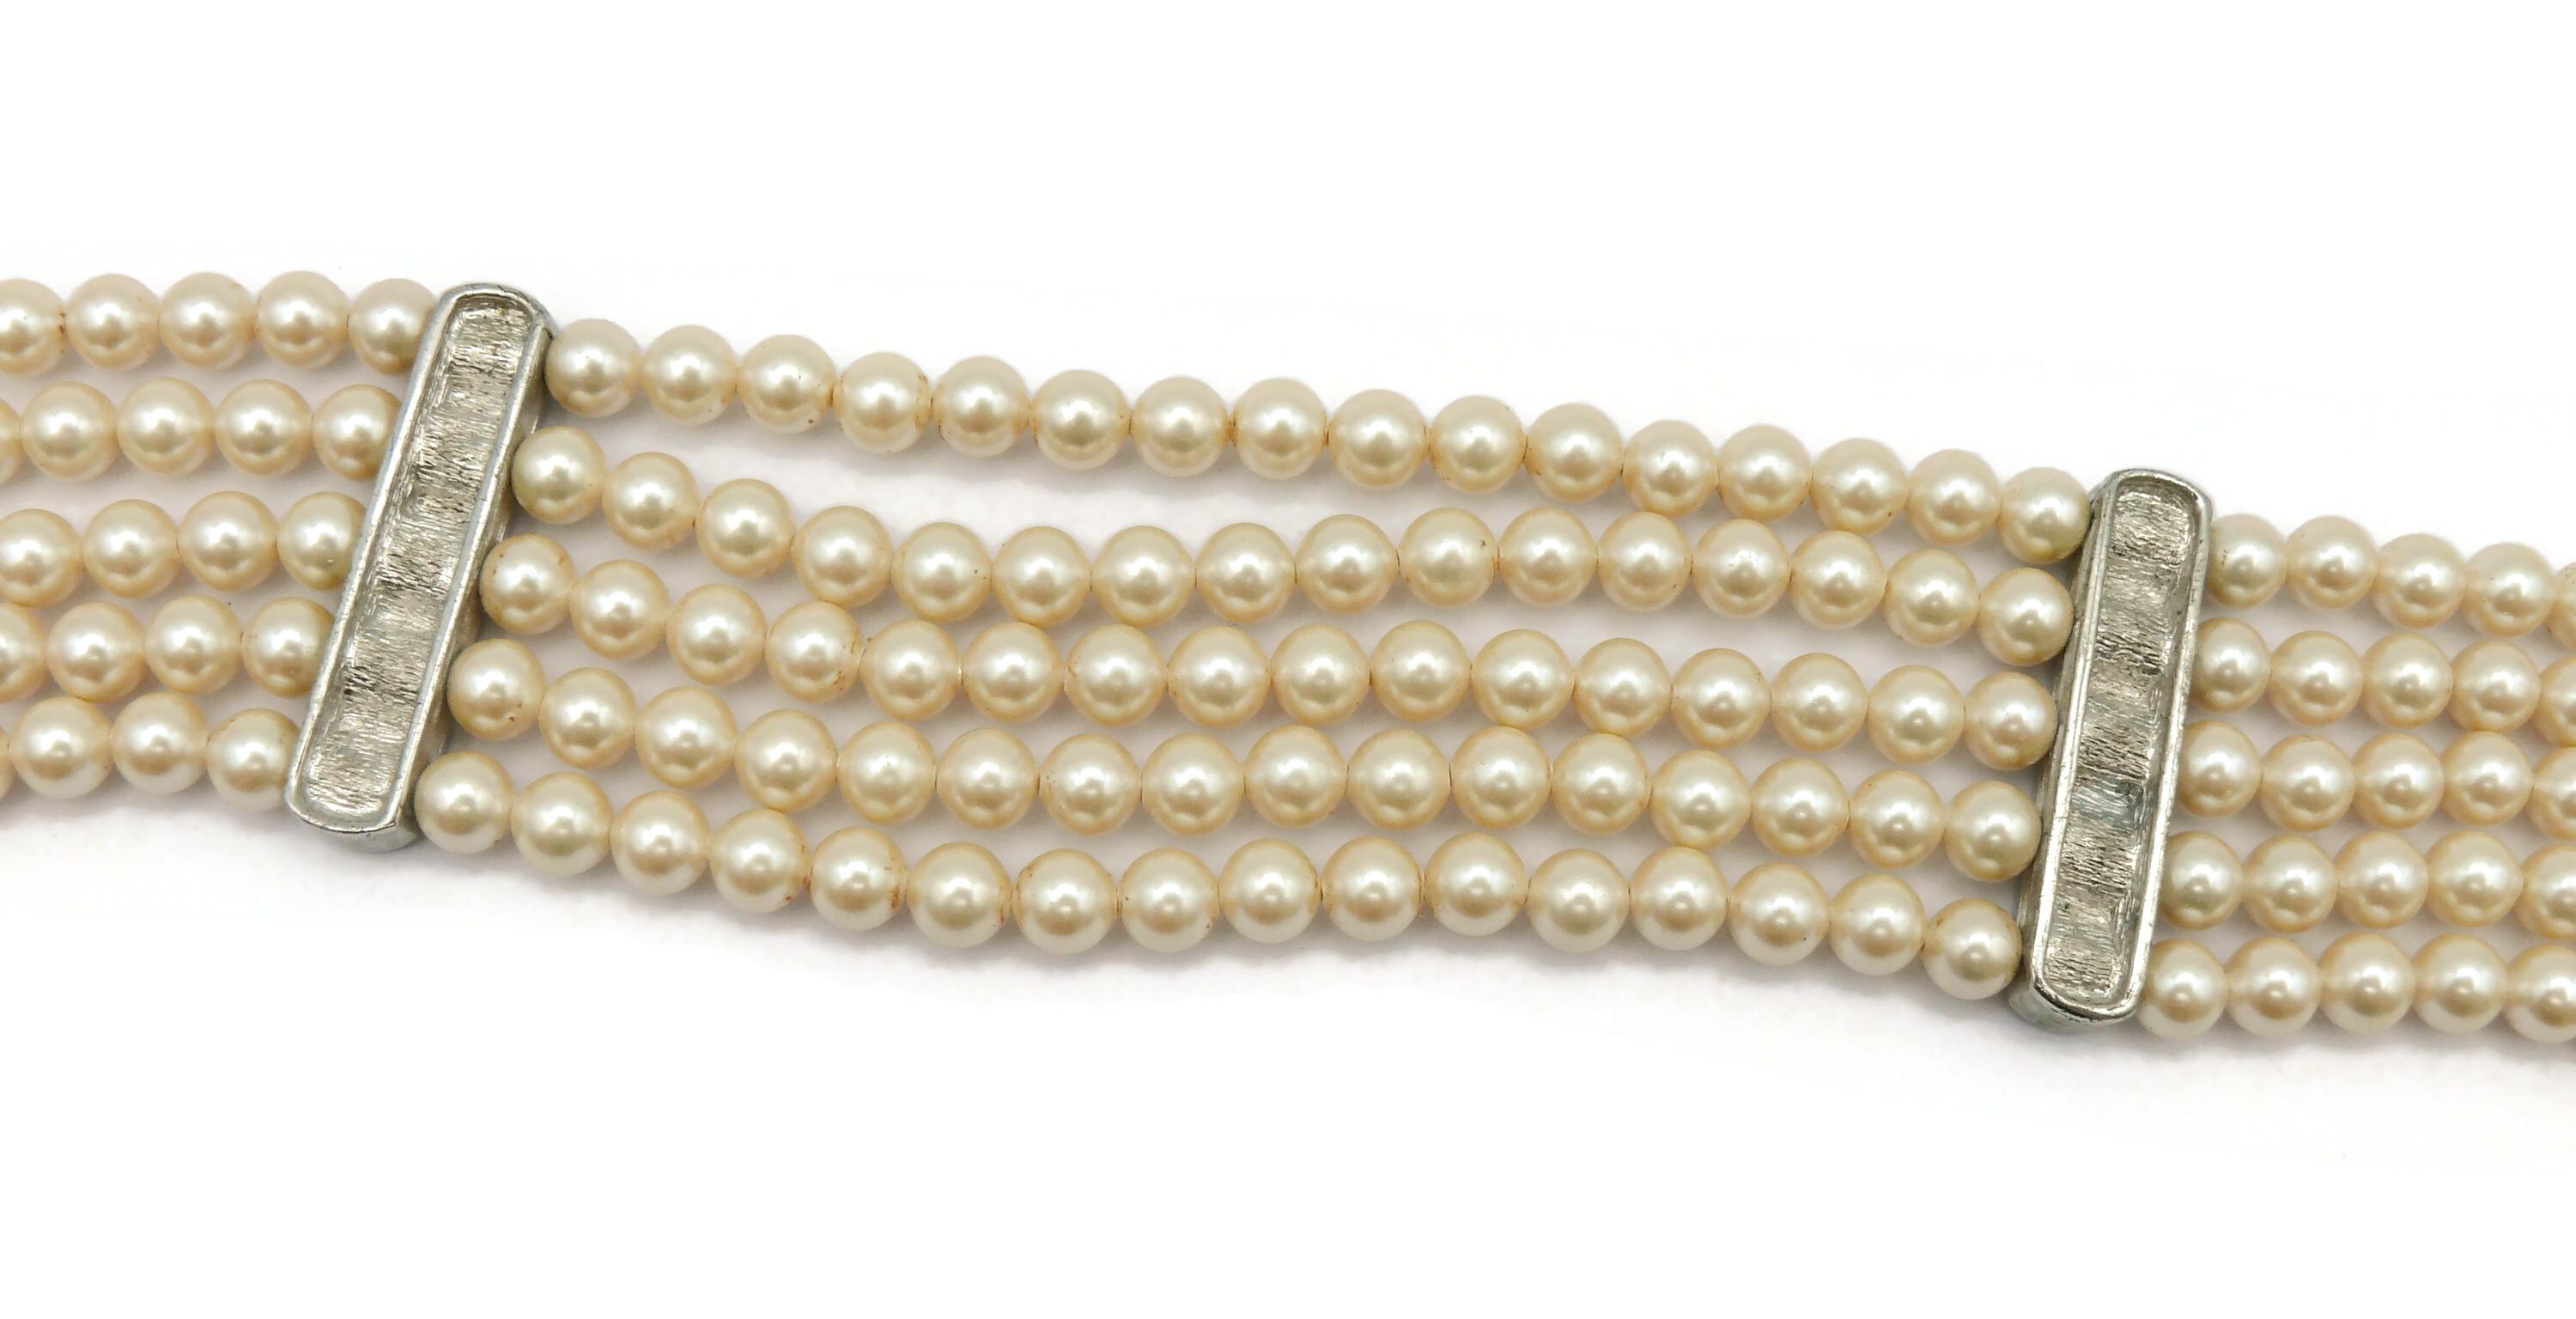 CHRISTIAN DIOR Vintage Multi-Strand Faux Pearl Necklace For Sale 8